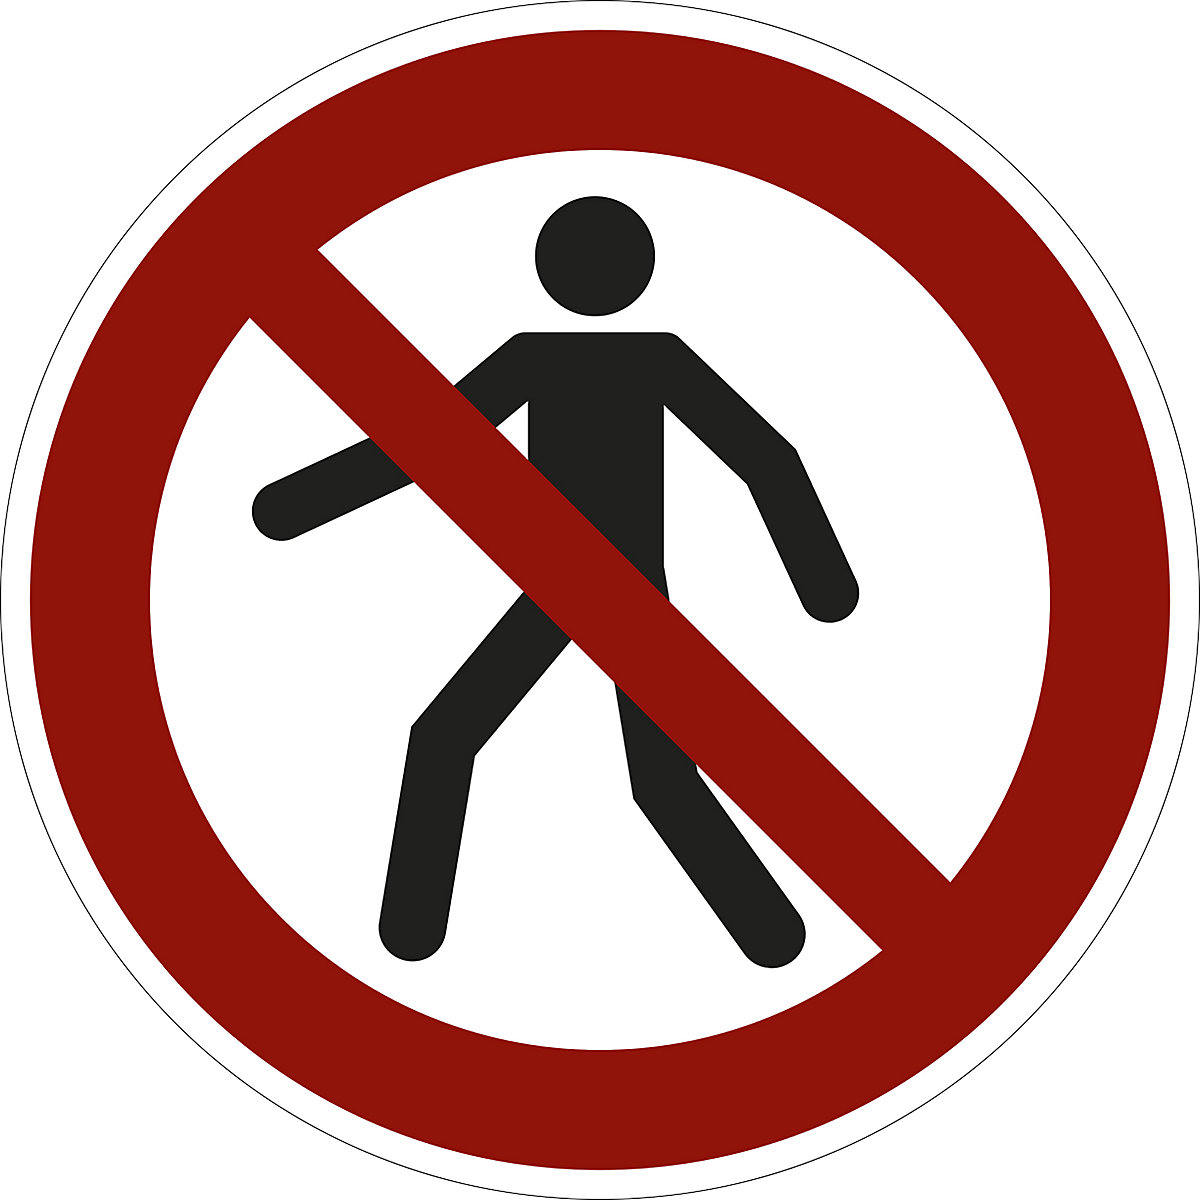 Prohibition sign, no pedestrian access, pack of 10, plastic, Ø 200 mm